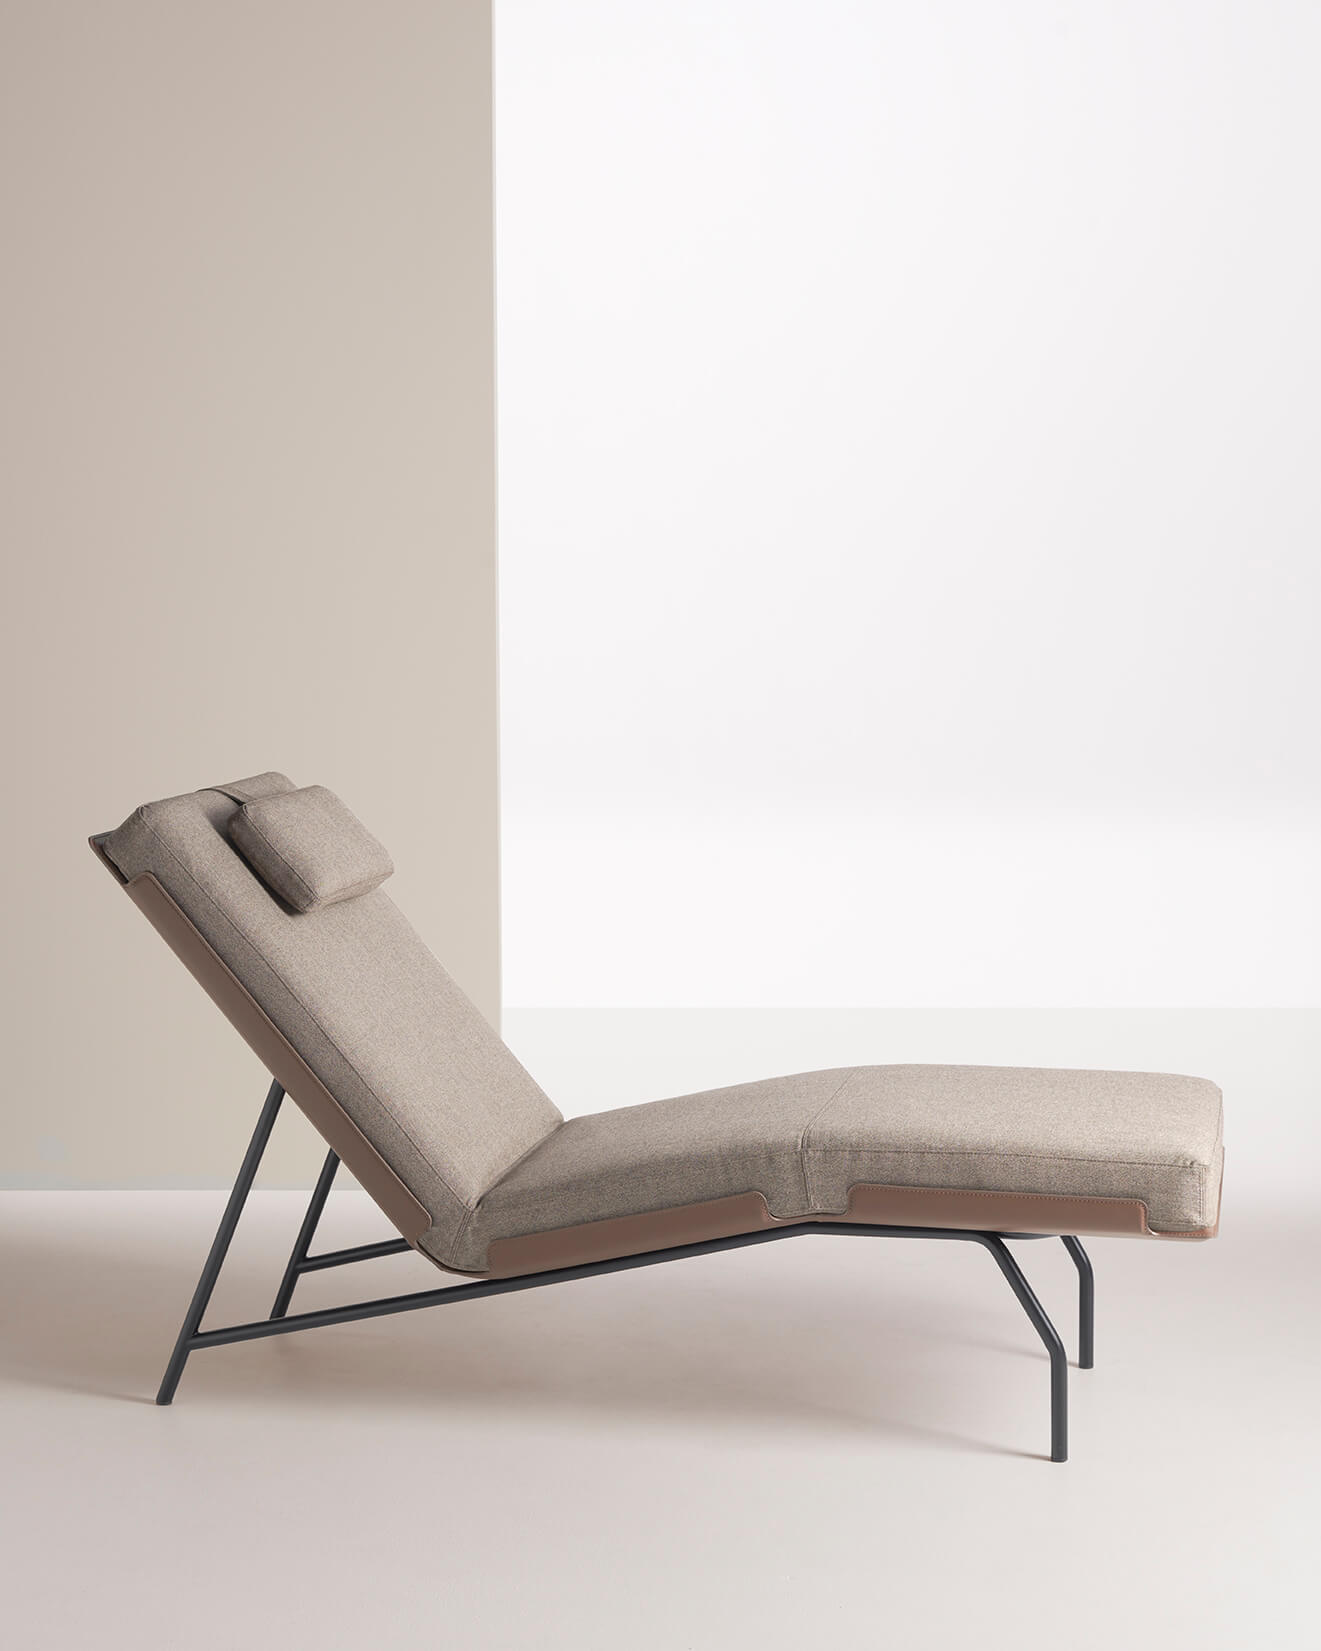 Frag_Caruso chaise longue